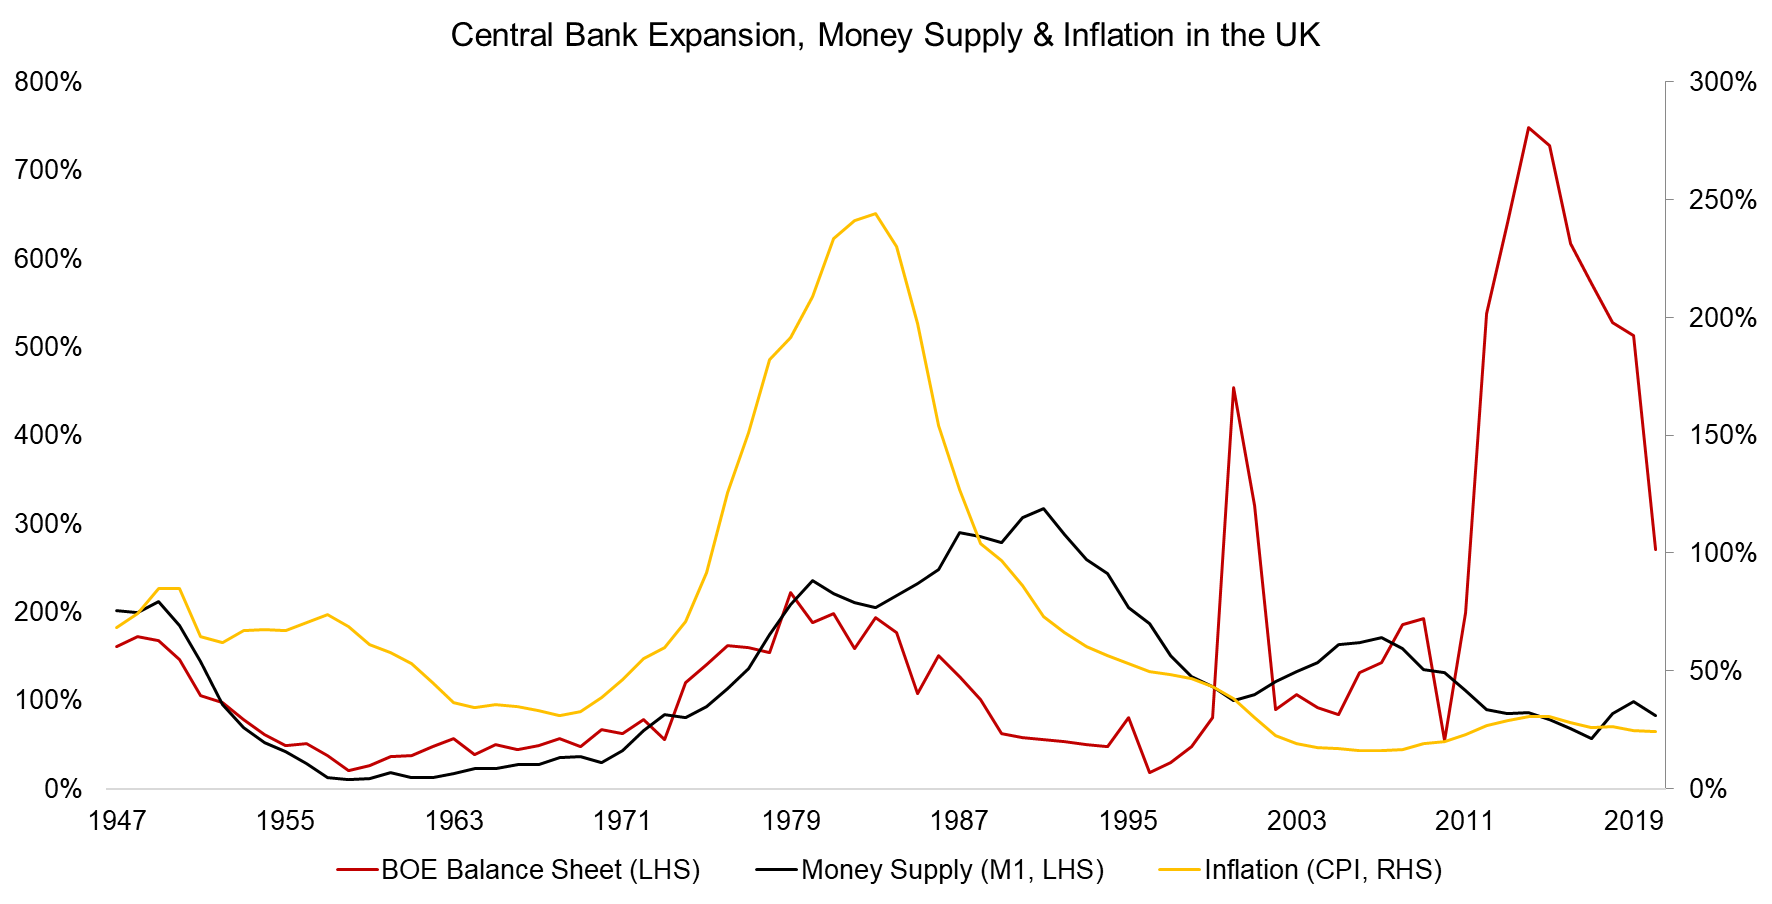 Central Bank Expansion, Money Supply & Inflation in the UK